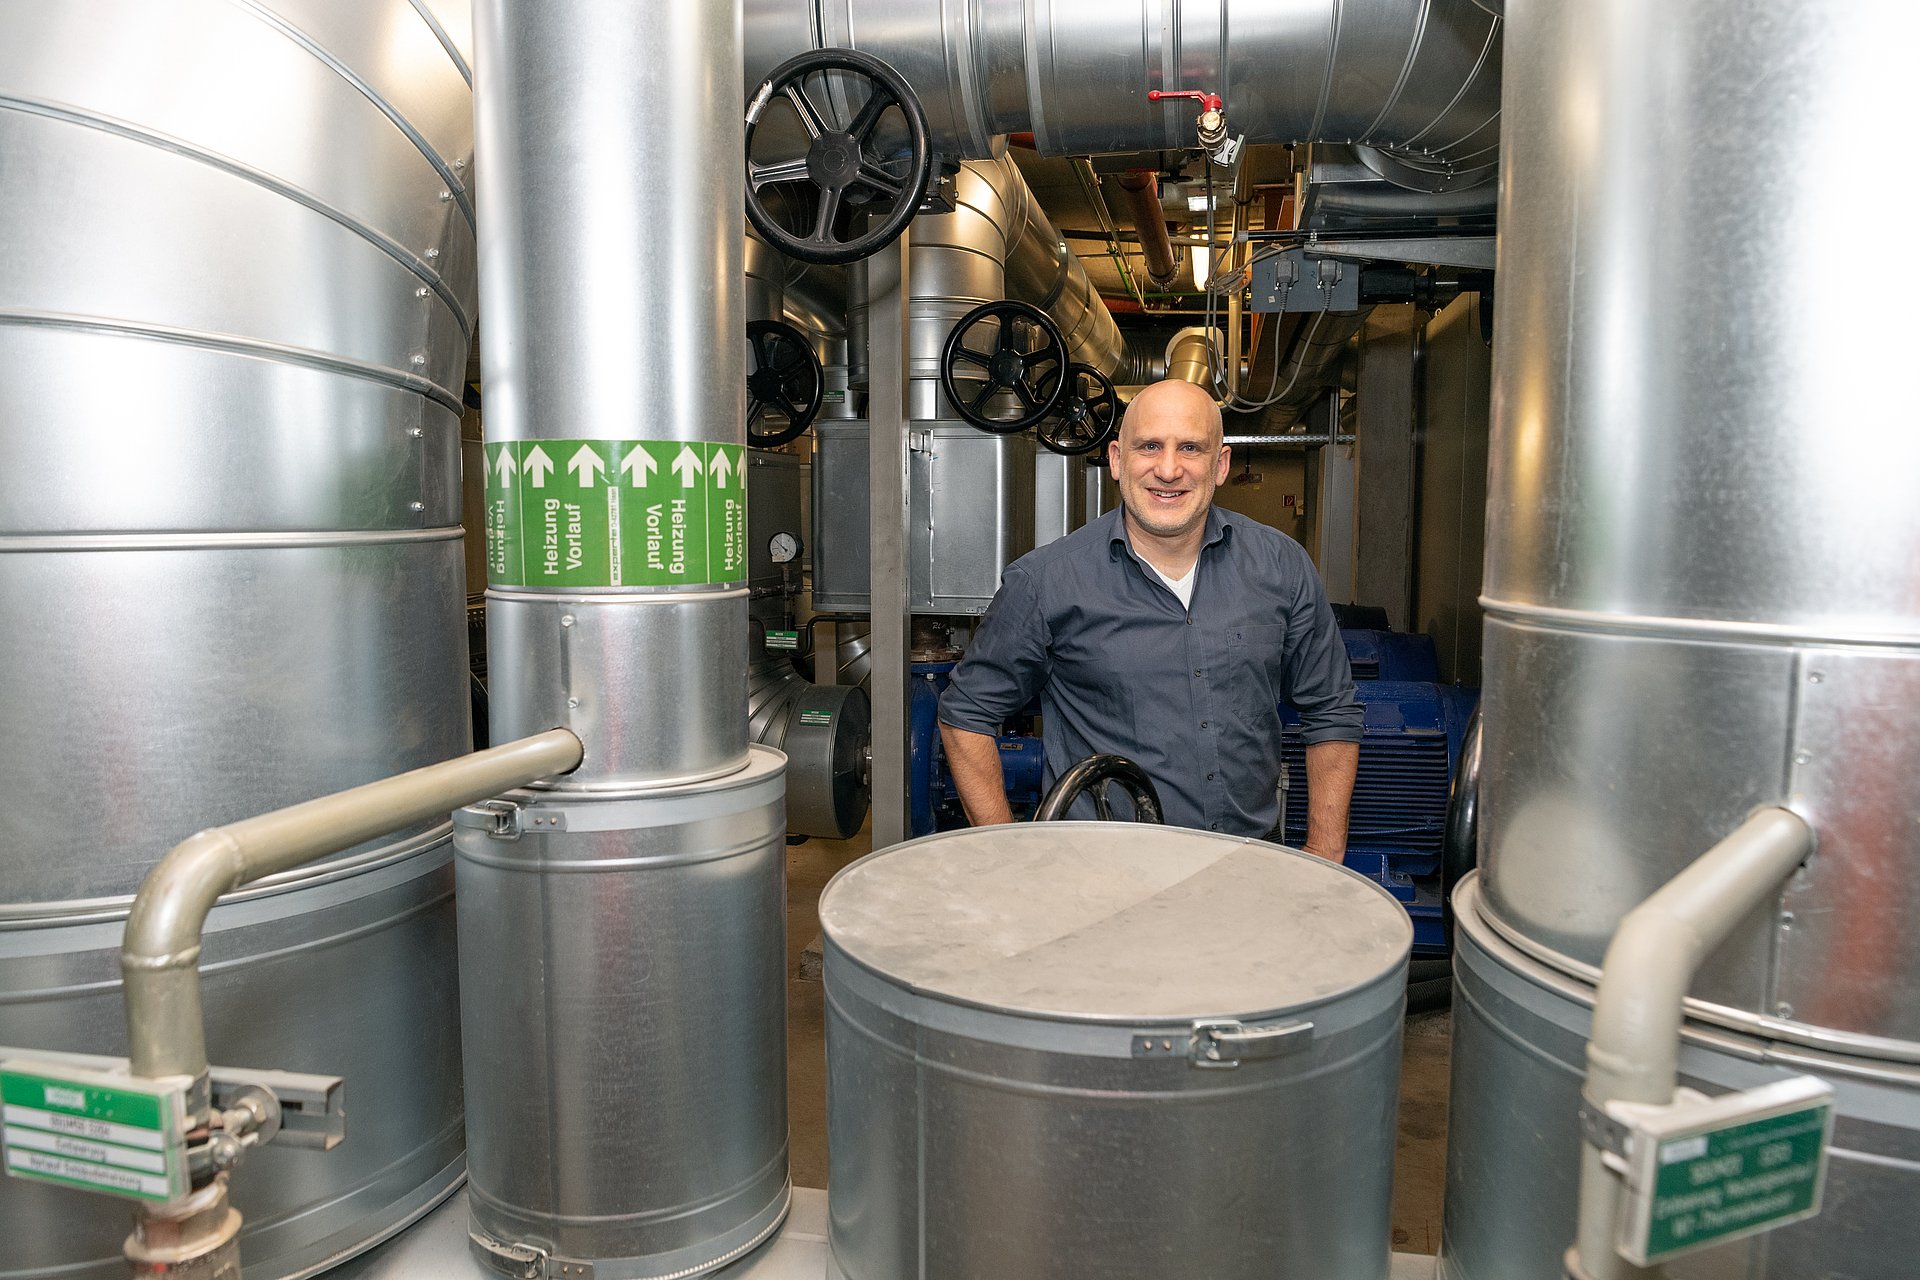 Dr. Kai Zosseder at the geothermal plant of Stadtwerke München in Messestadt Riem. Geothermal energy is one of the many resources below ground.